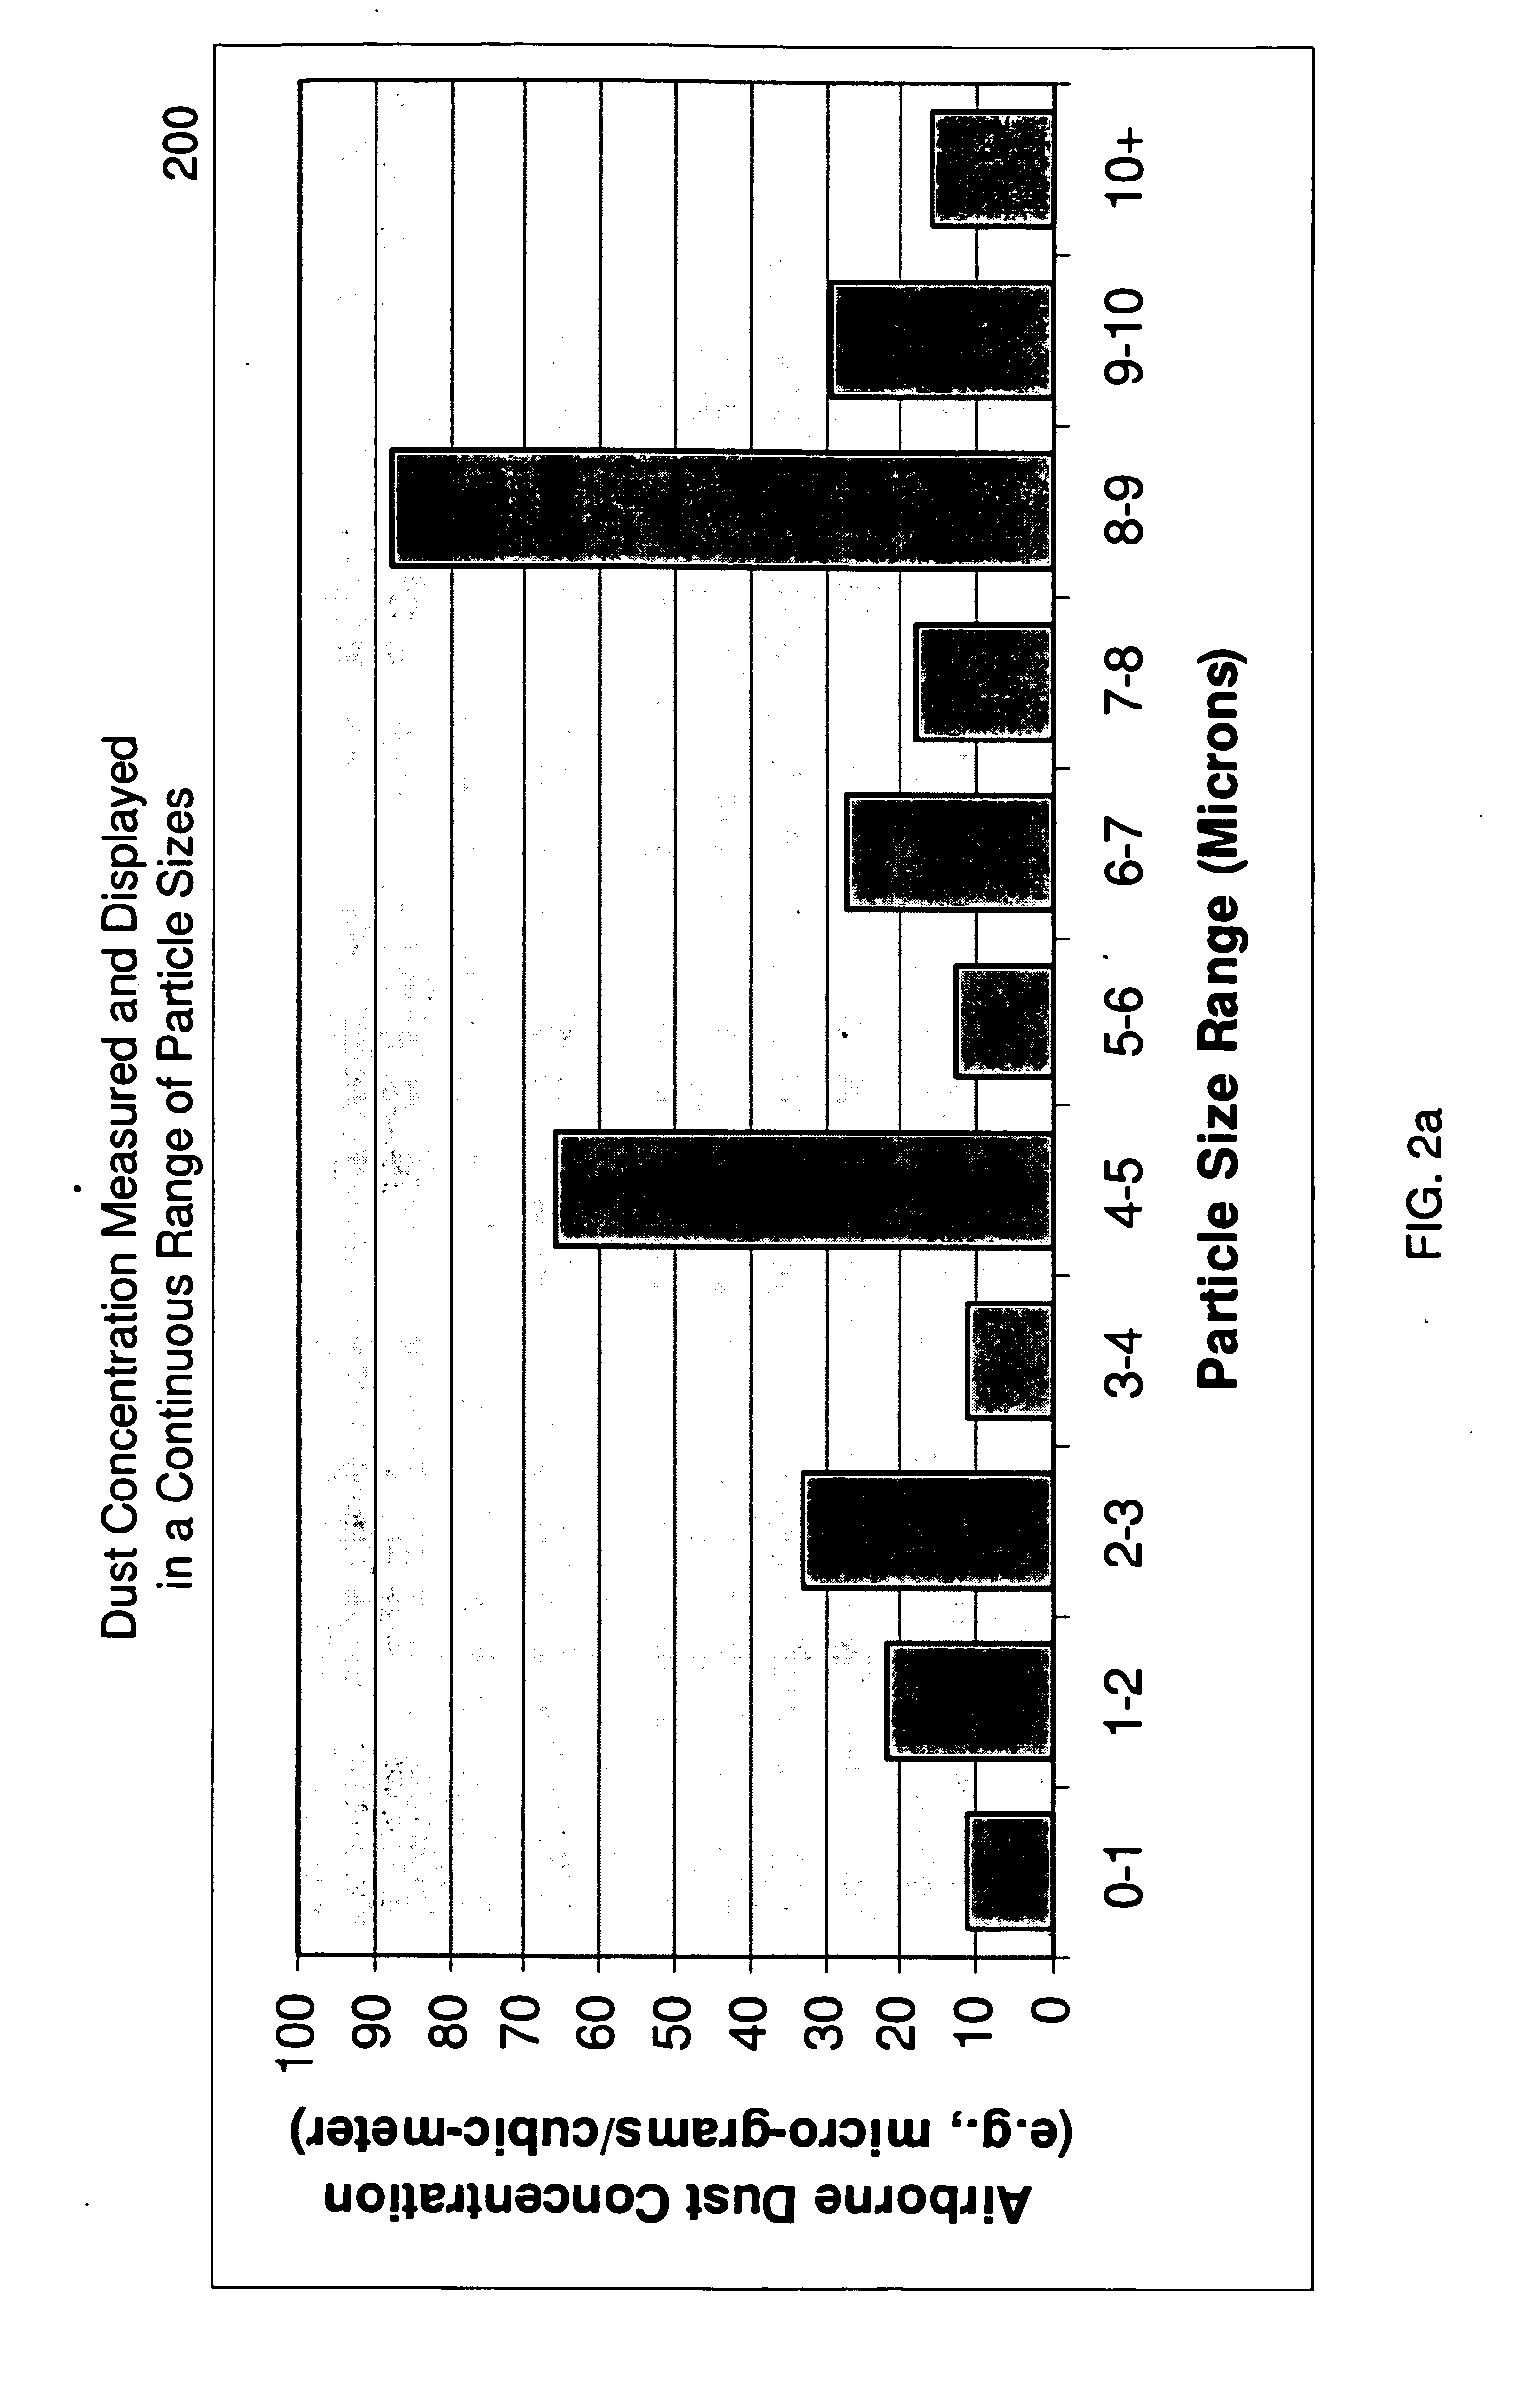 Methods and Systems for Analysis, Reporting and Display of Environmental Data